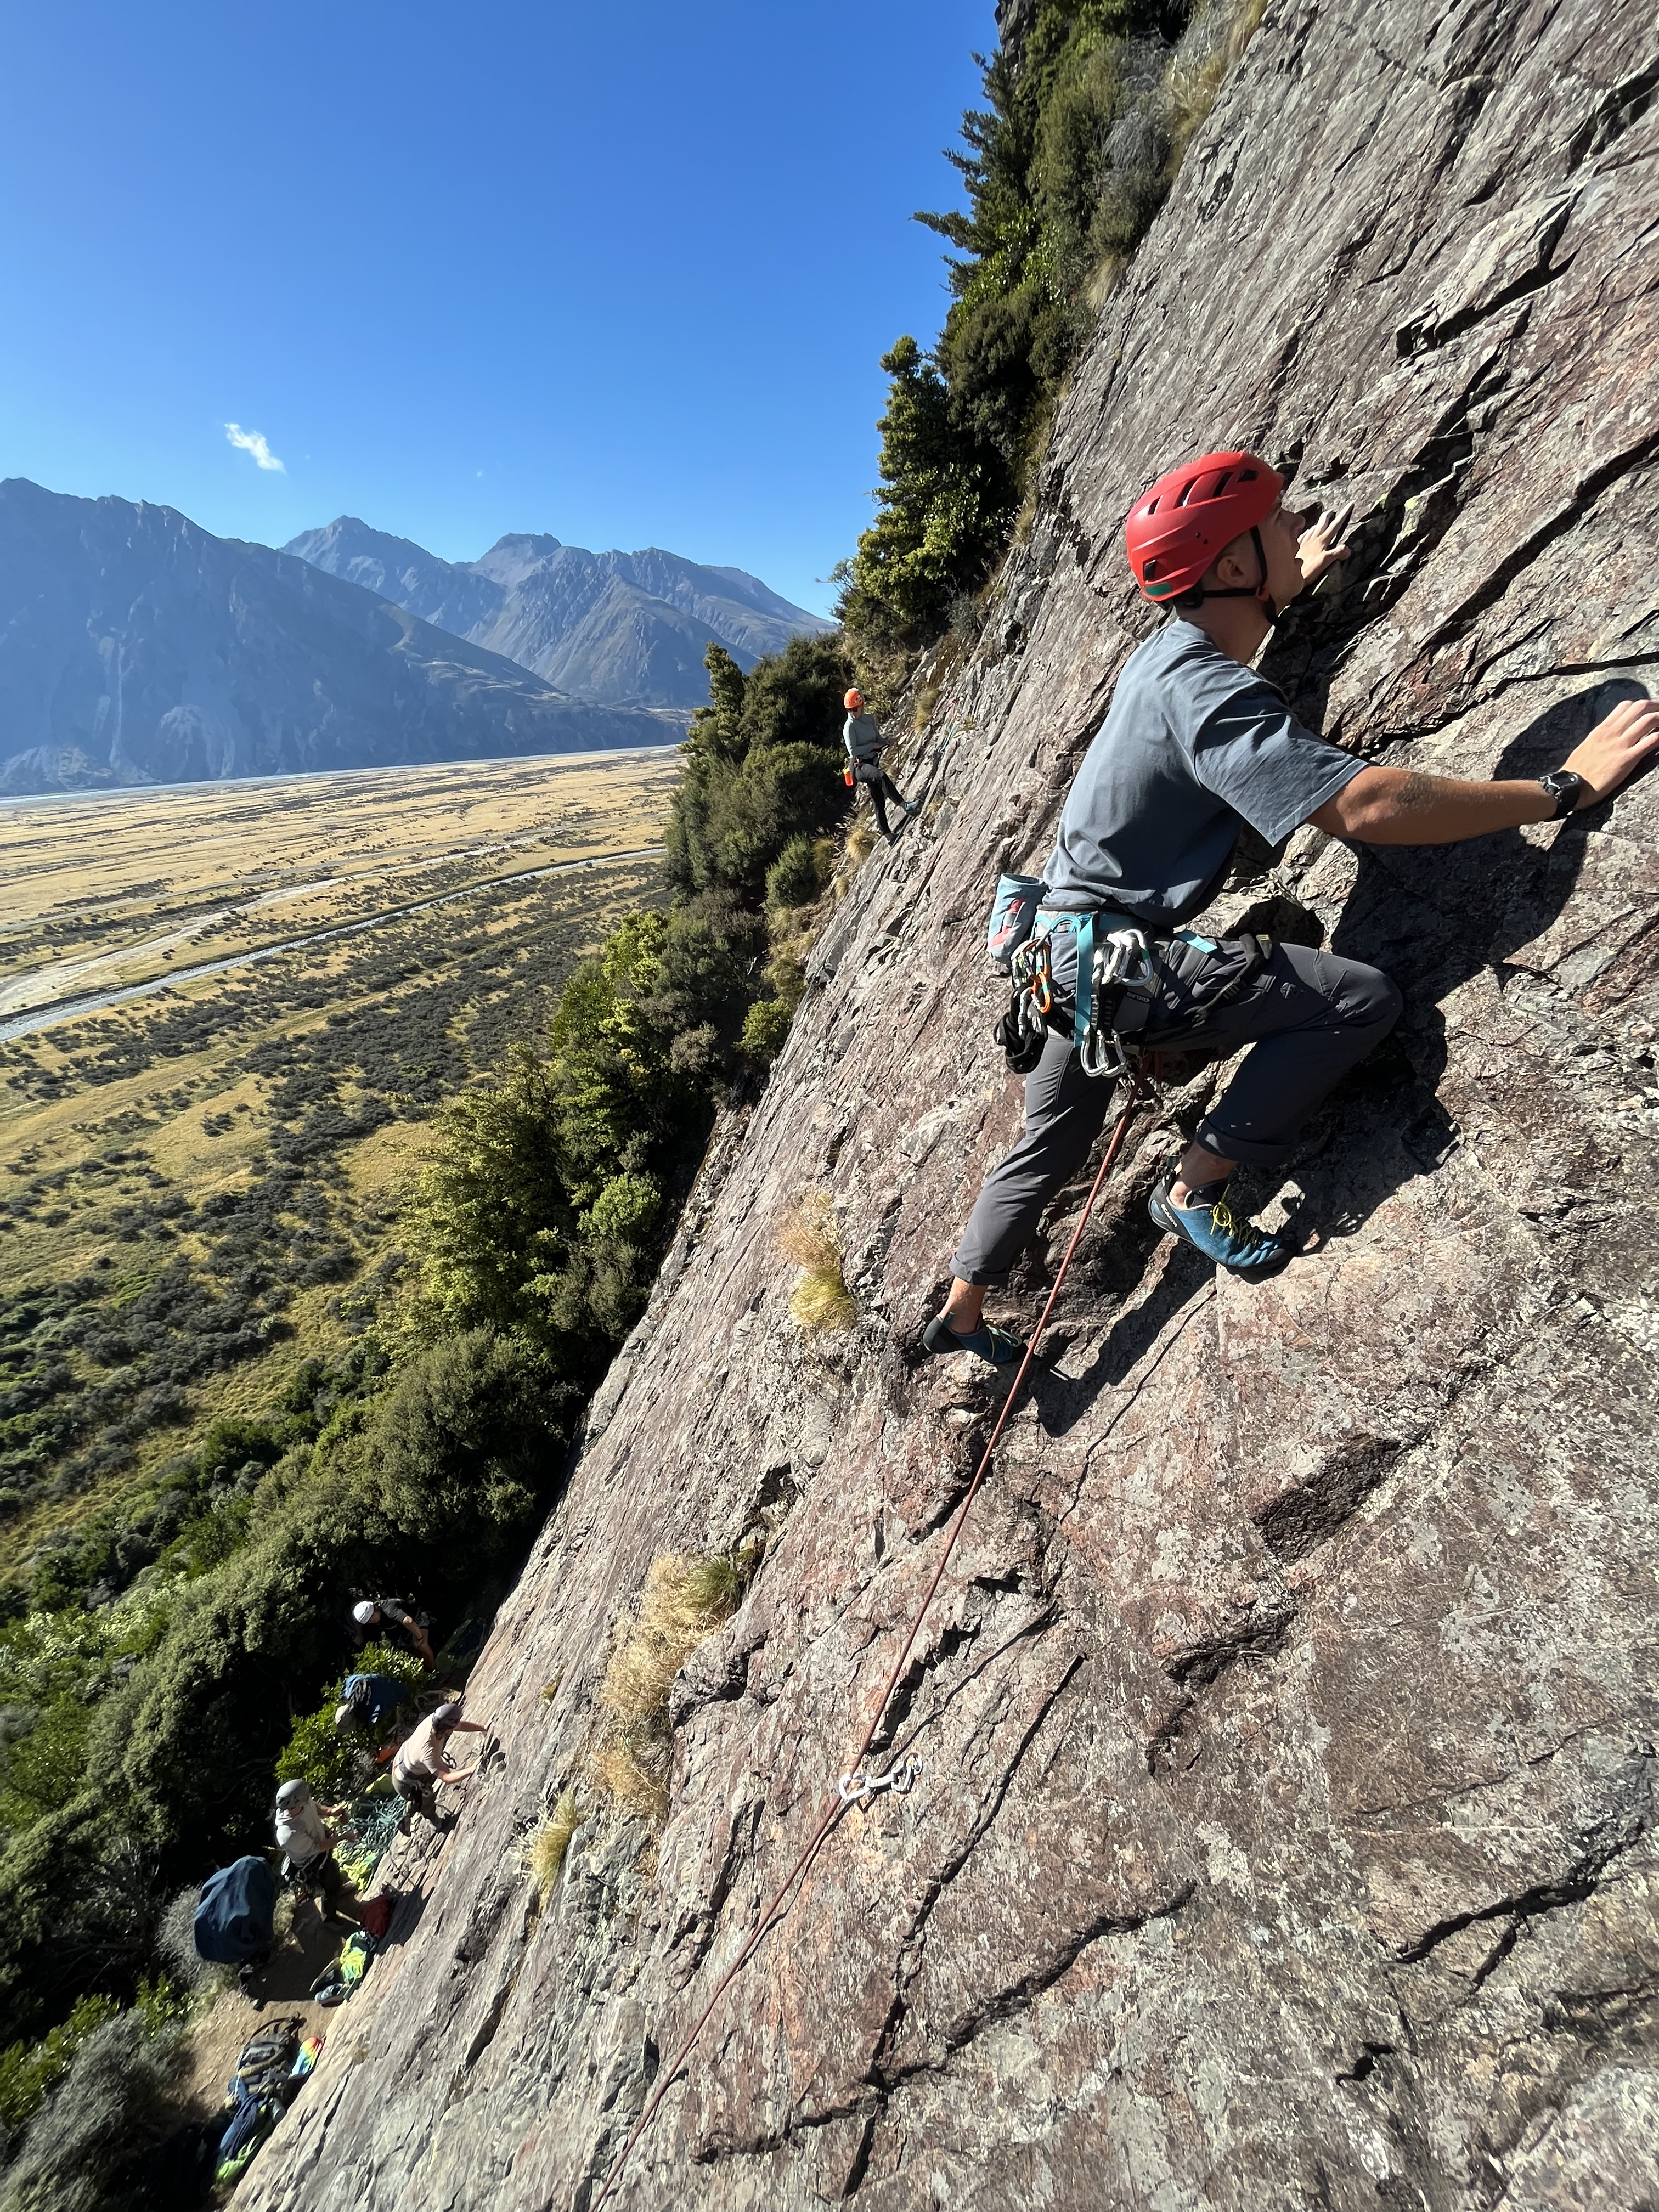 Everything you need to know about climbing on our Adventure Guide Programs